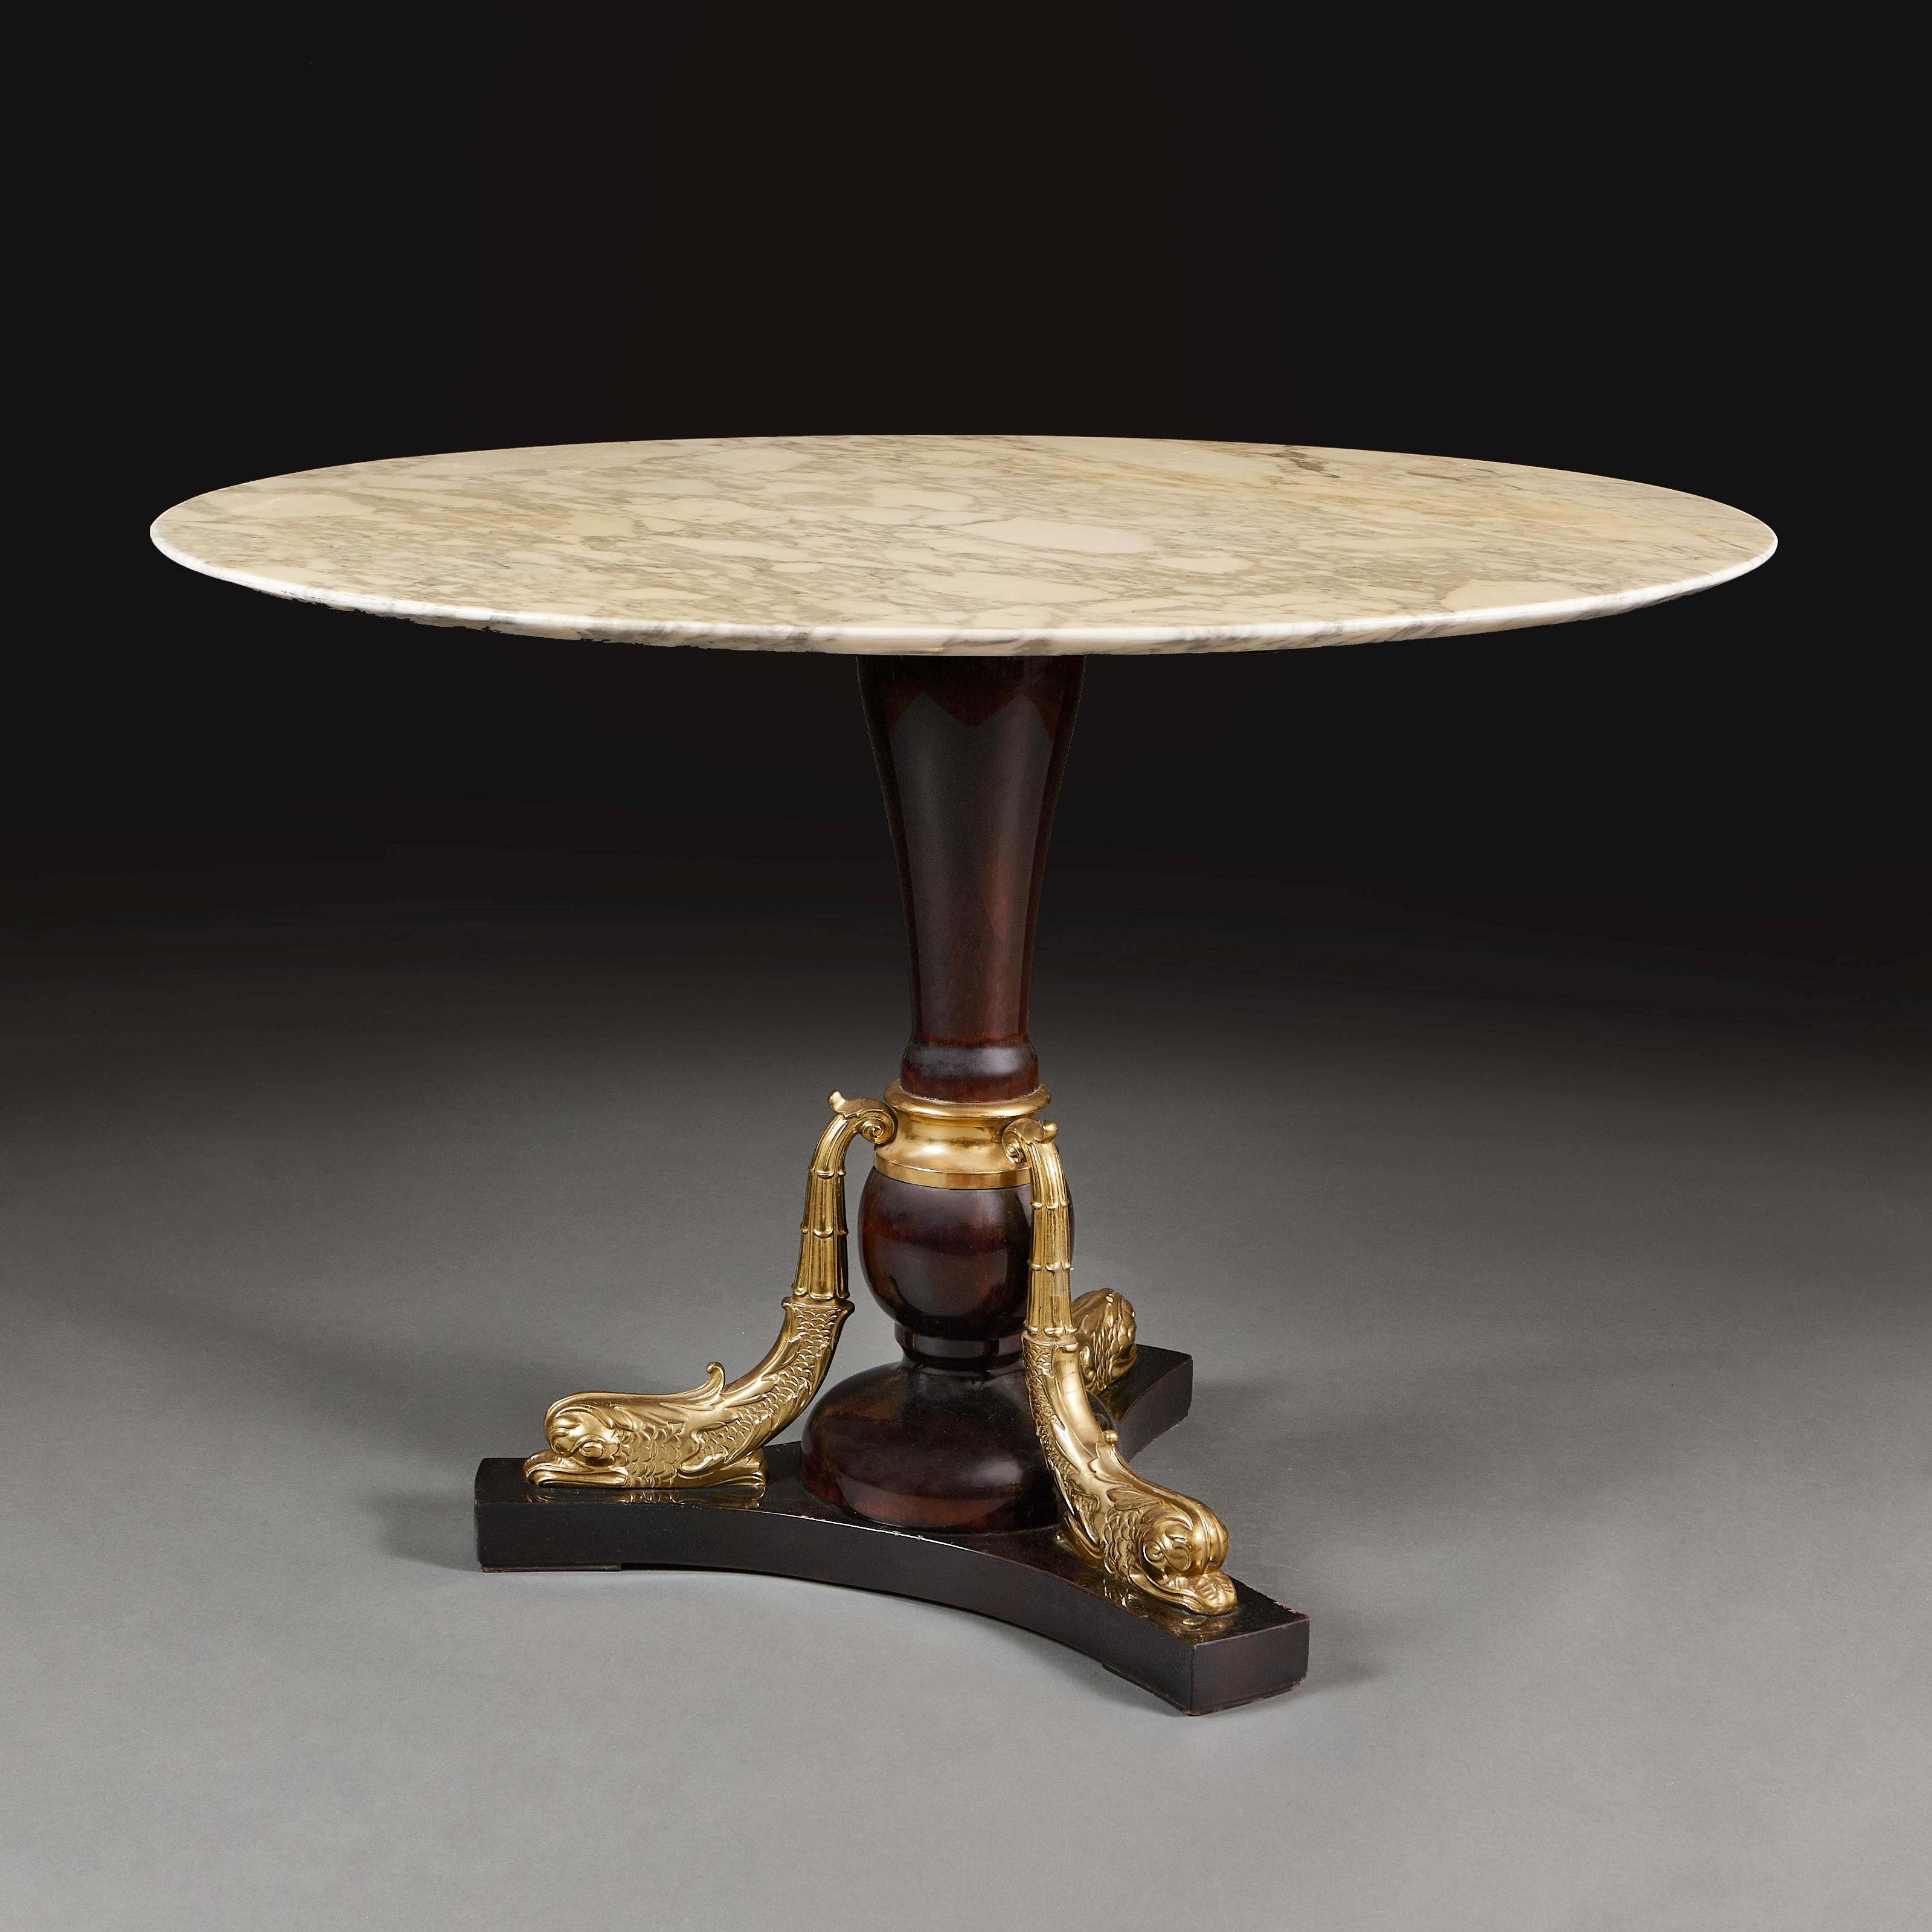 France, circa 1940

An early 20th century centre table after Maison Jansen with a white Carrara marble top and stylised ormolu dolphins adorning a lacquer wood base.

Jean-Henri Jansen, originally from Denmark, founded the interior design house